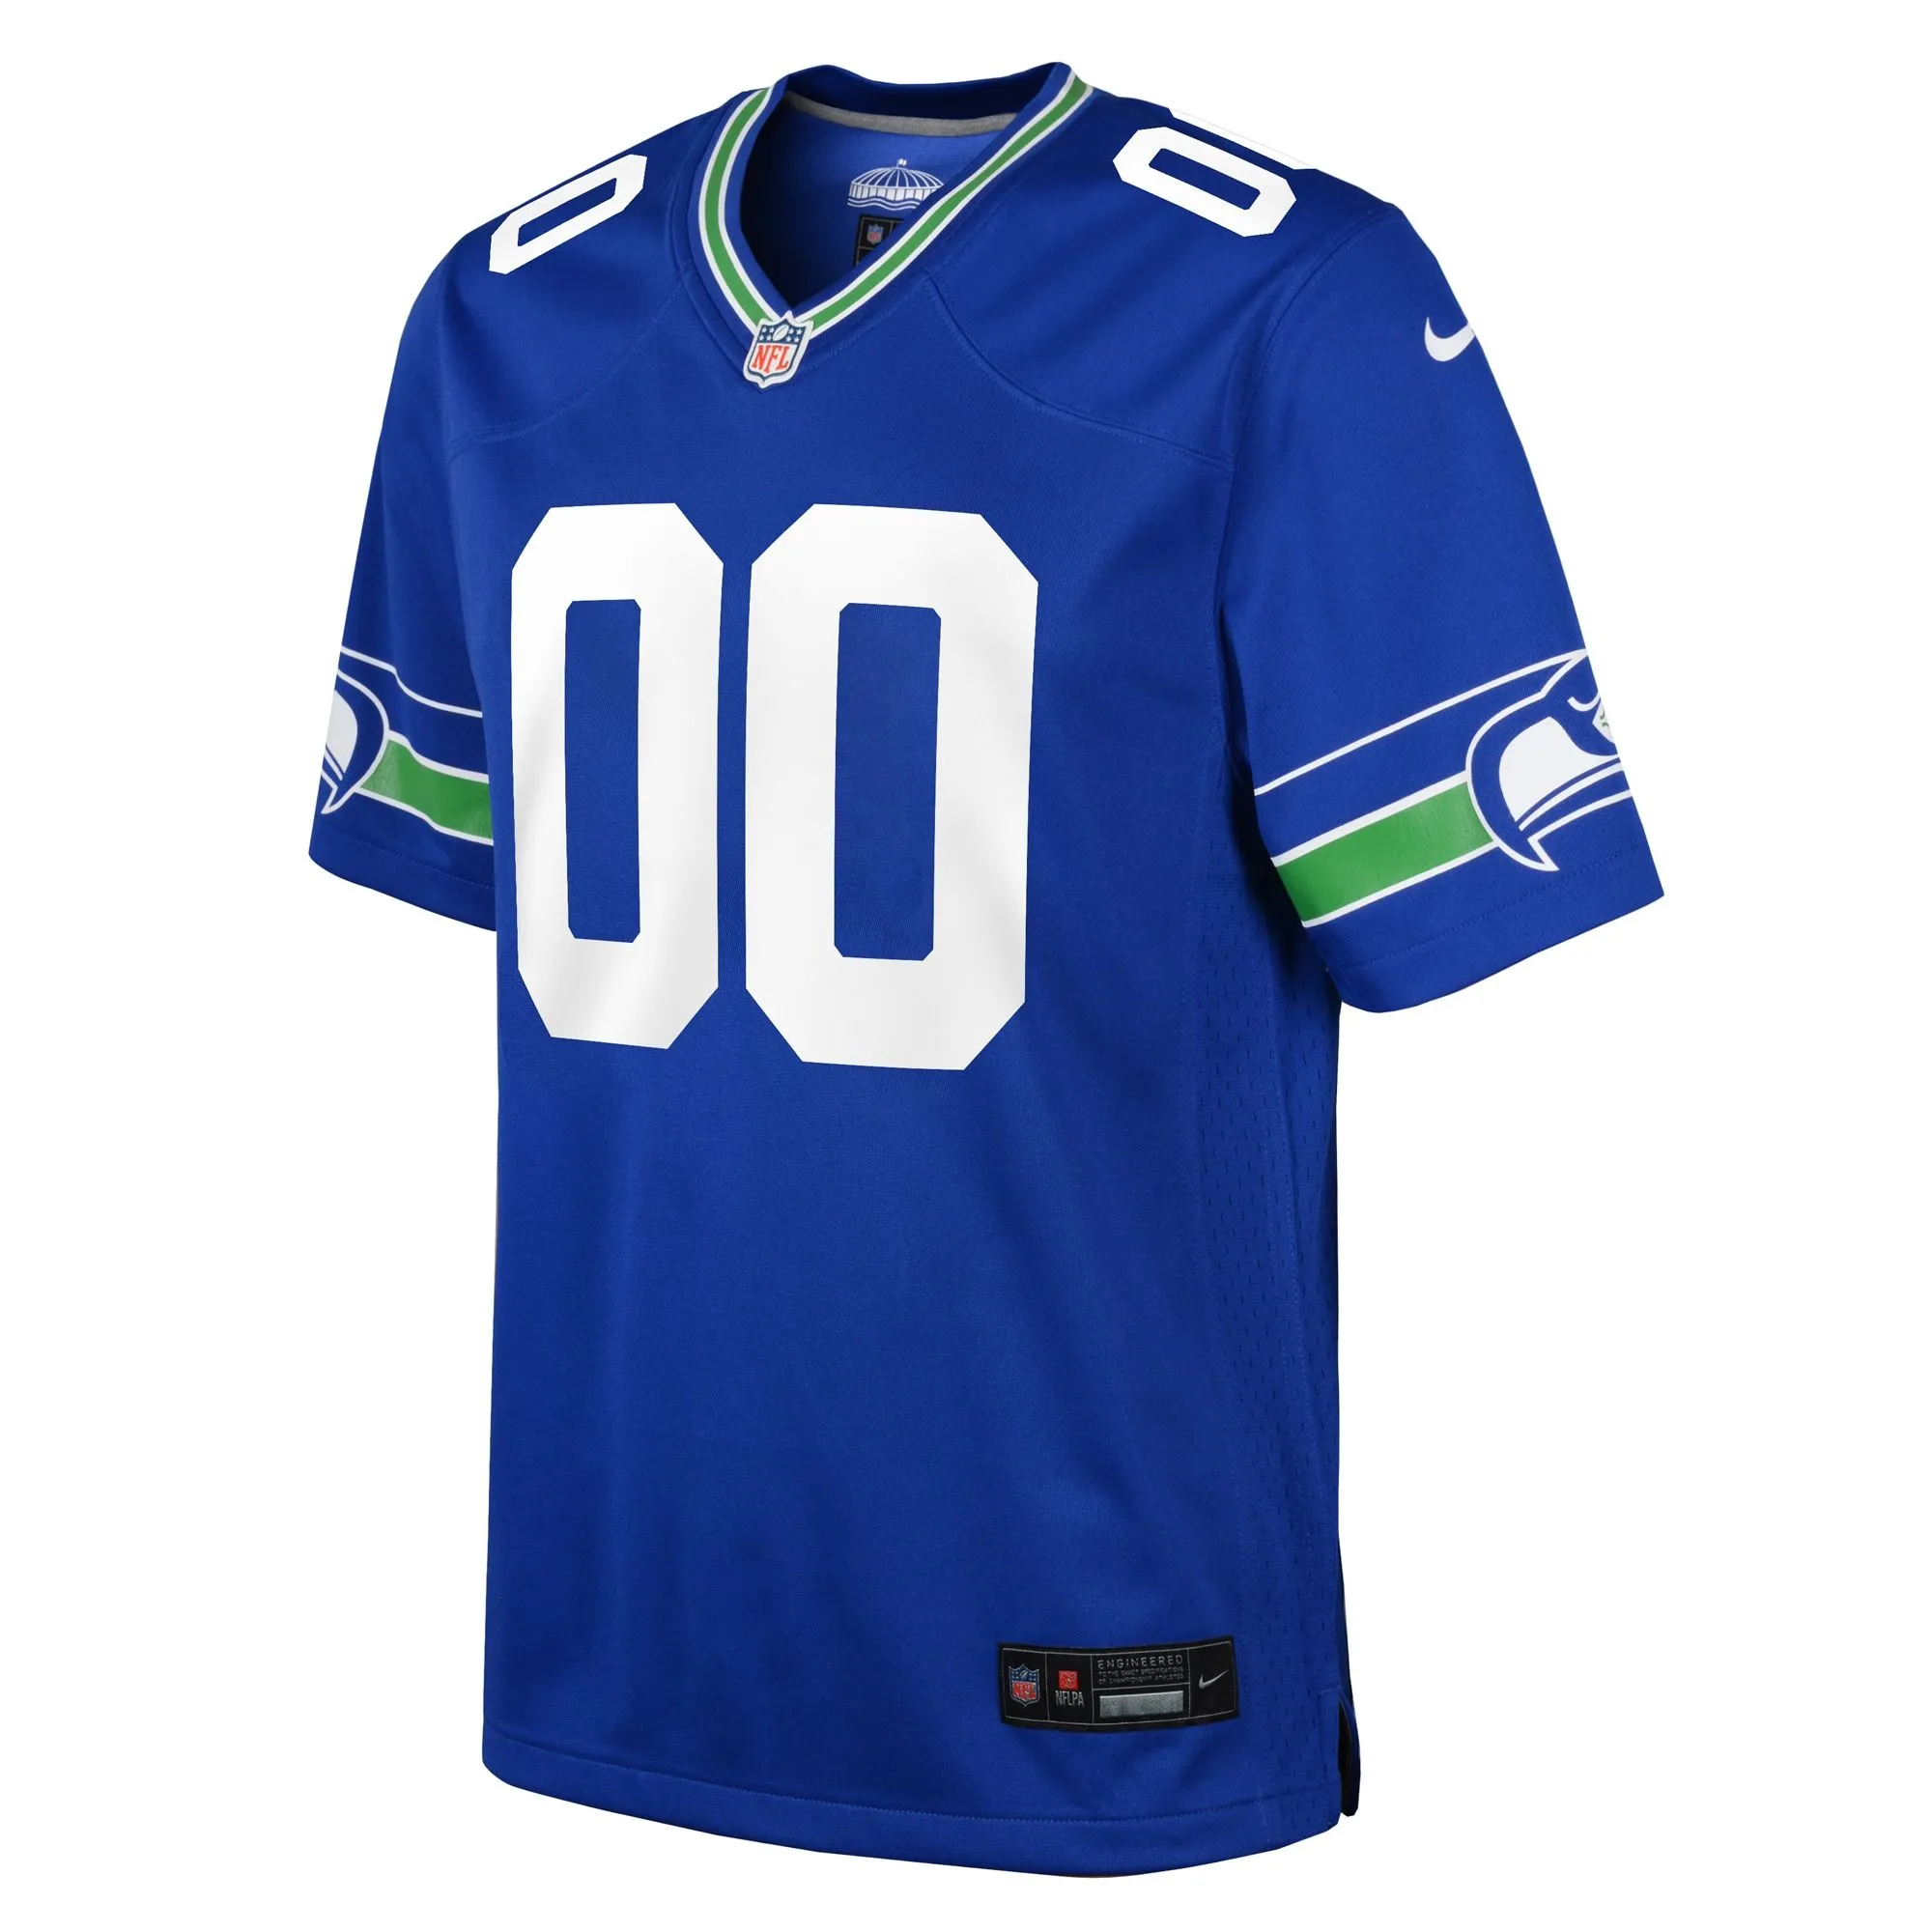 Seattle Seahawks  Youth Throwback Custom Jersey - Royal